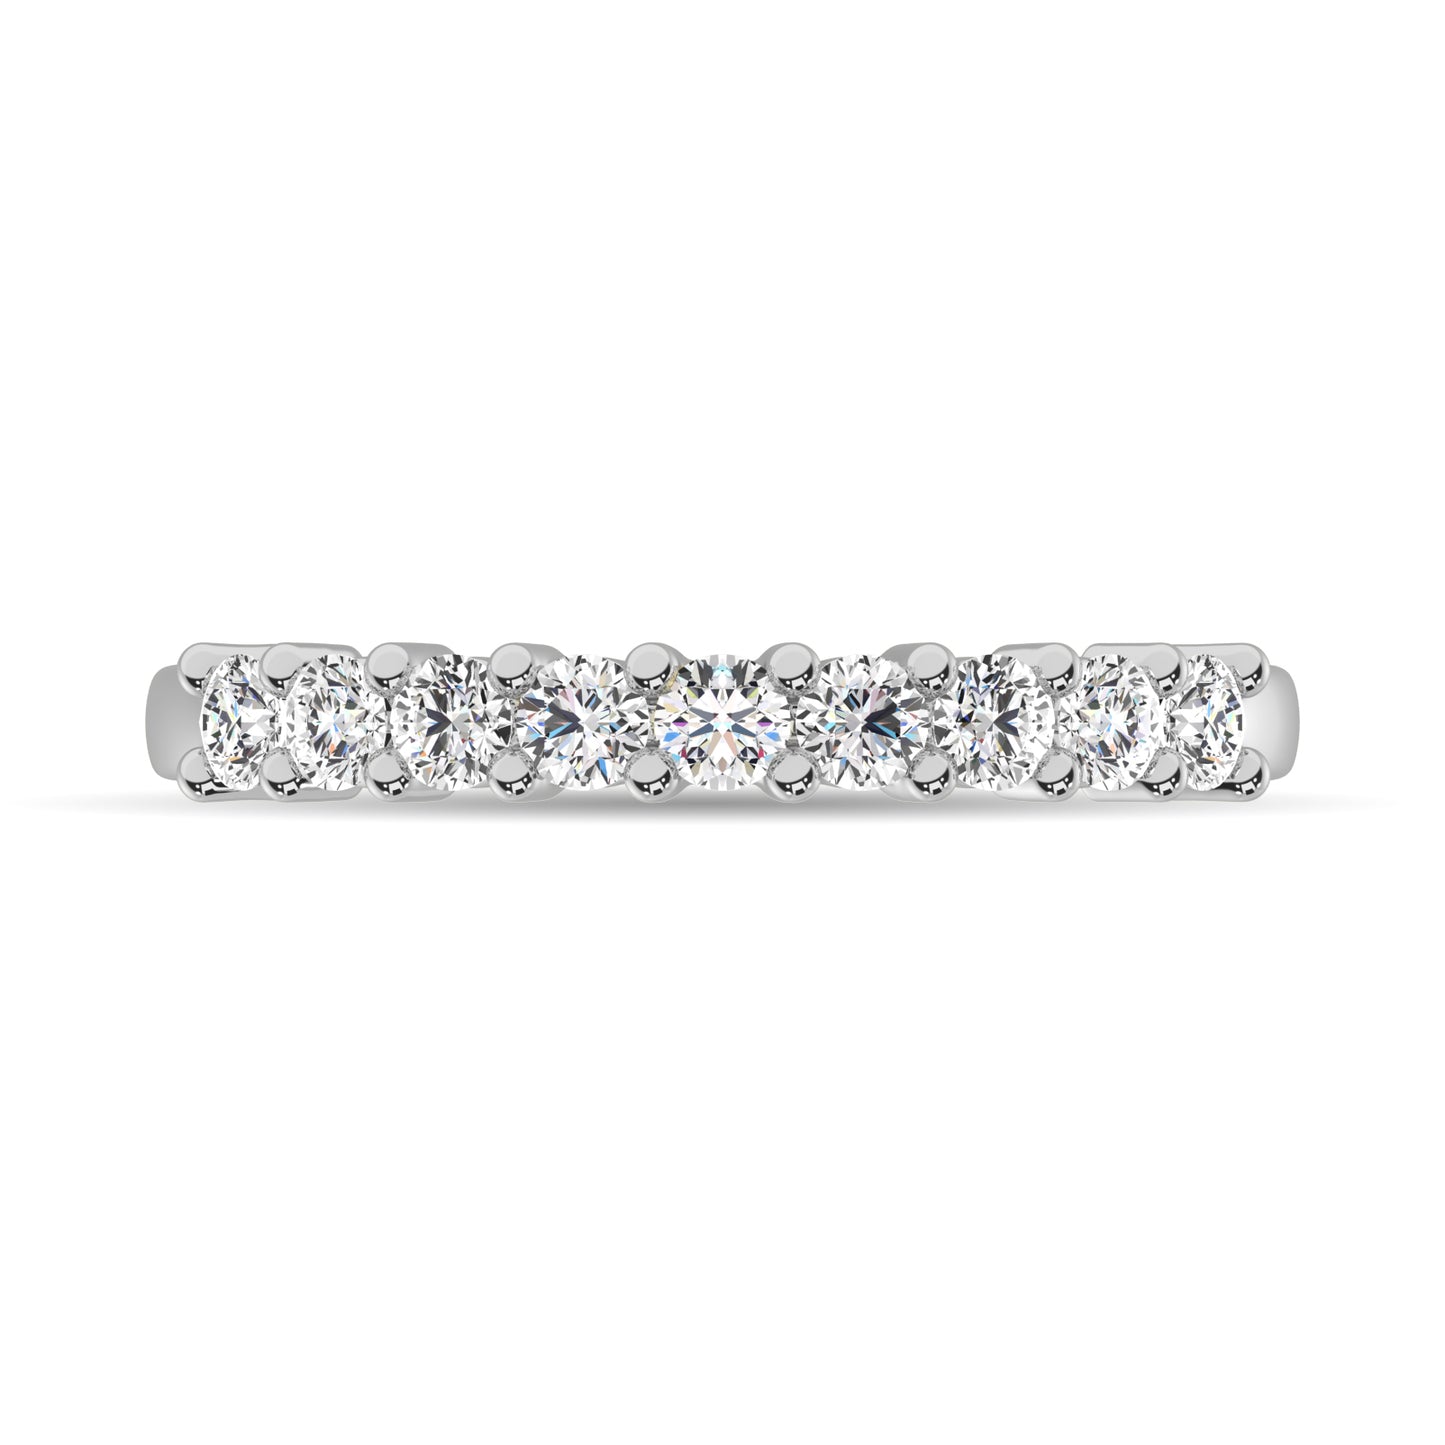 Multiple Row Diamond Thumb Ring in 14K White Gold - 0.25 to 1.00 Carats